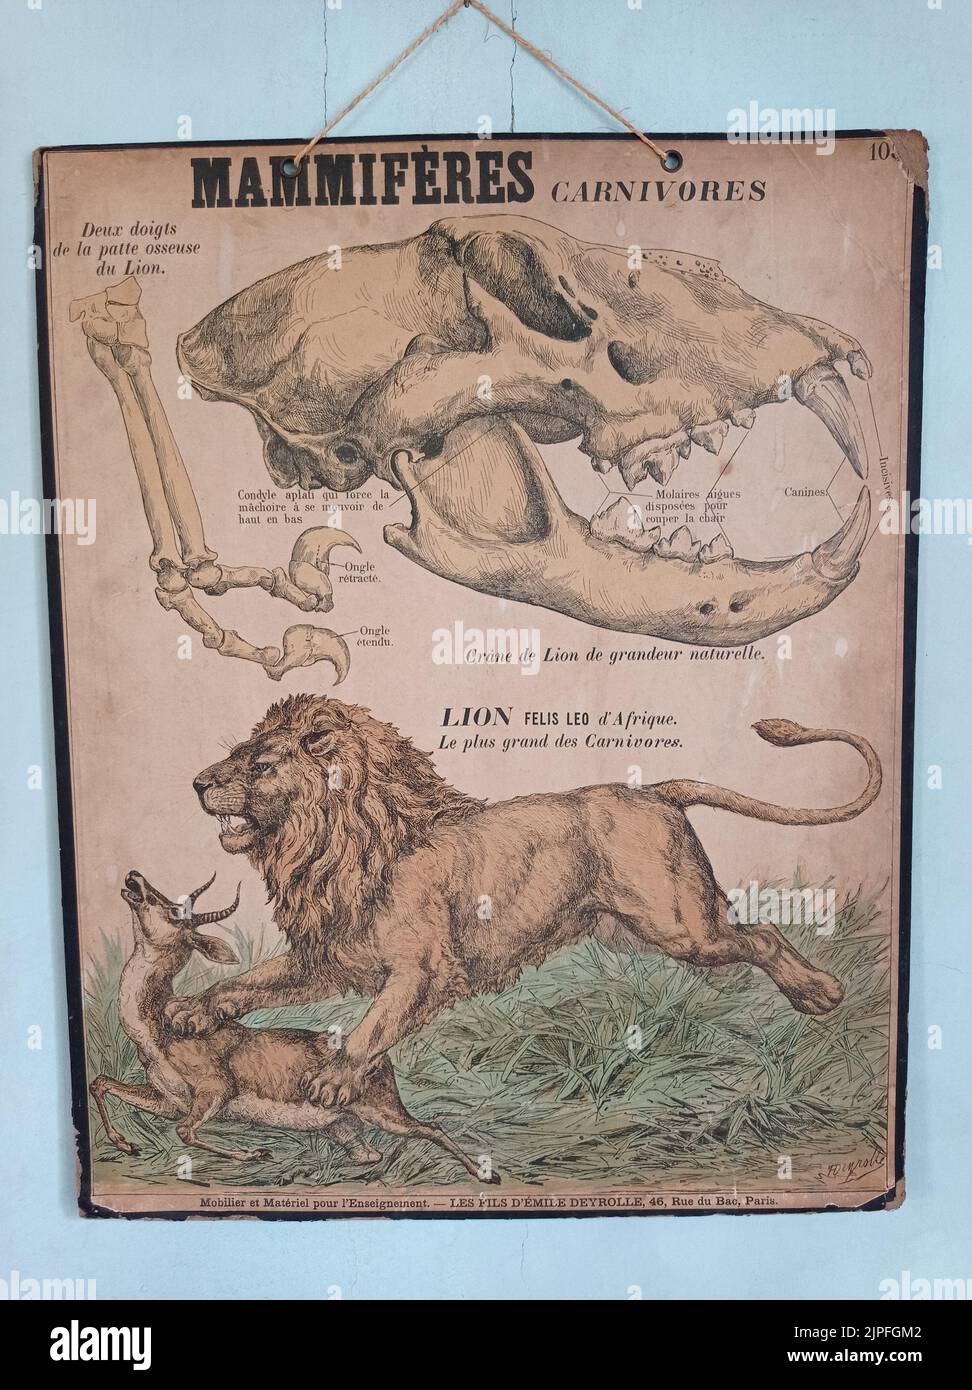 AFFICHE ANCIENNE MAMMIFERES CARNIVORES Stock Photo